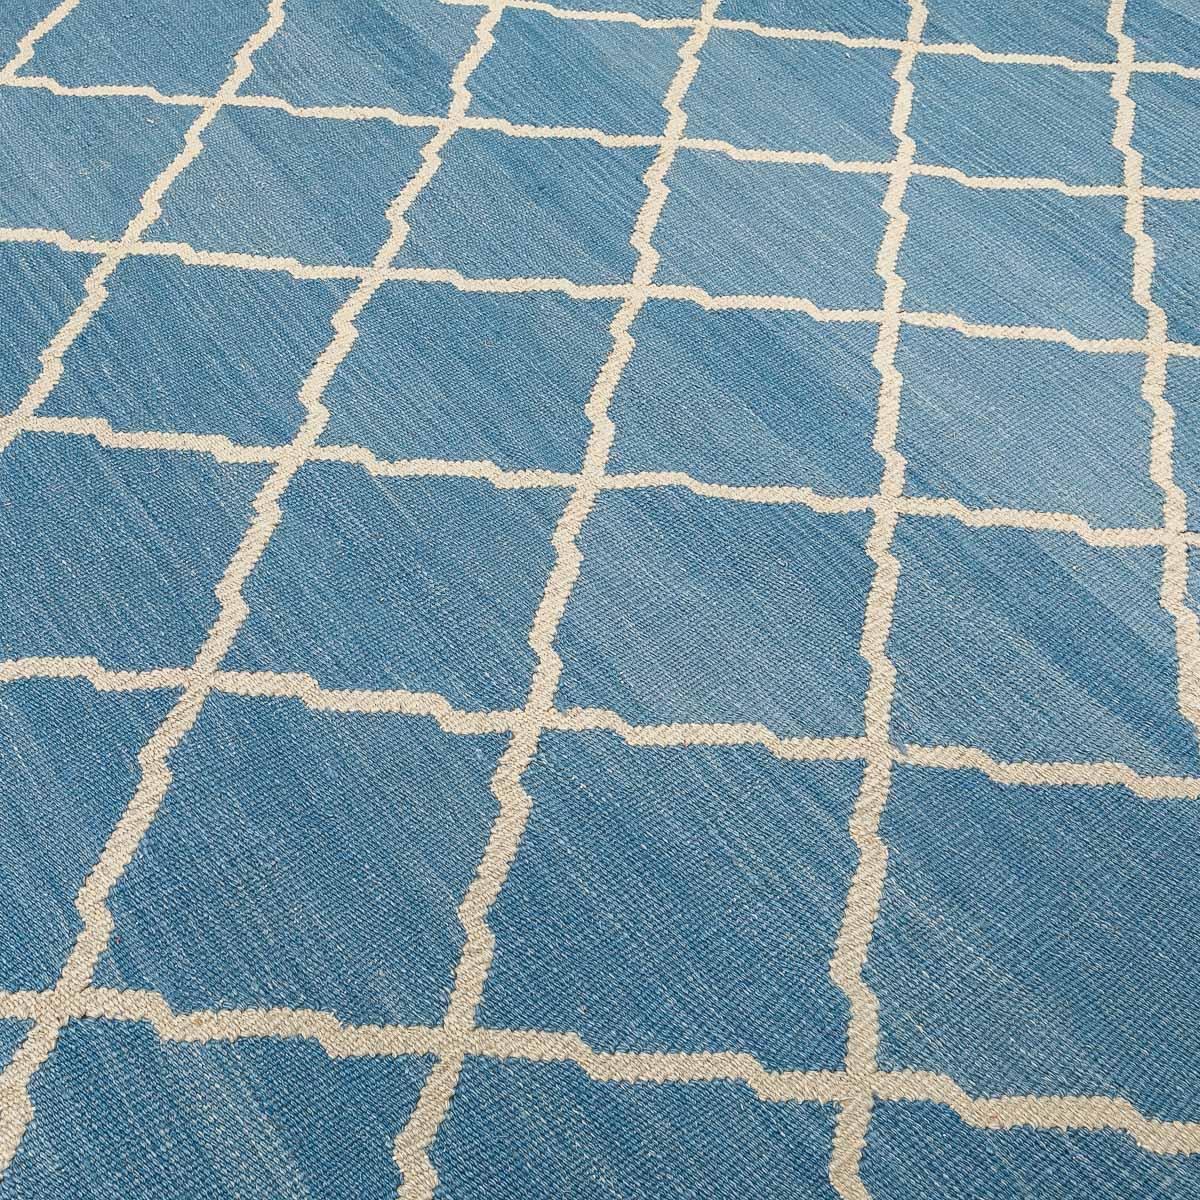 Wool Contemporary Kilim, Blue and White Geometric Design.